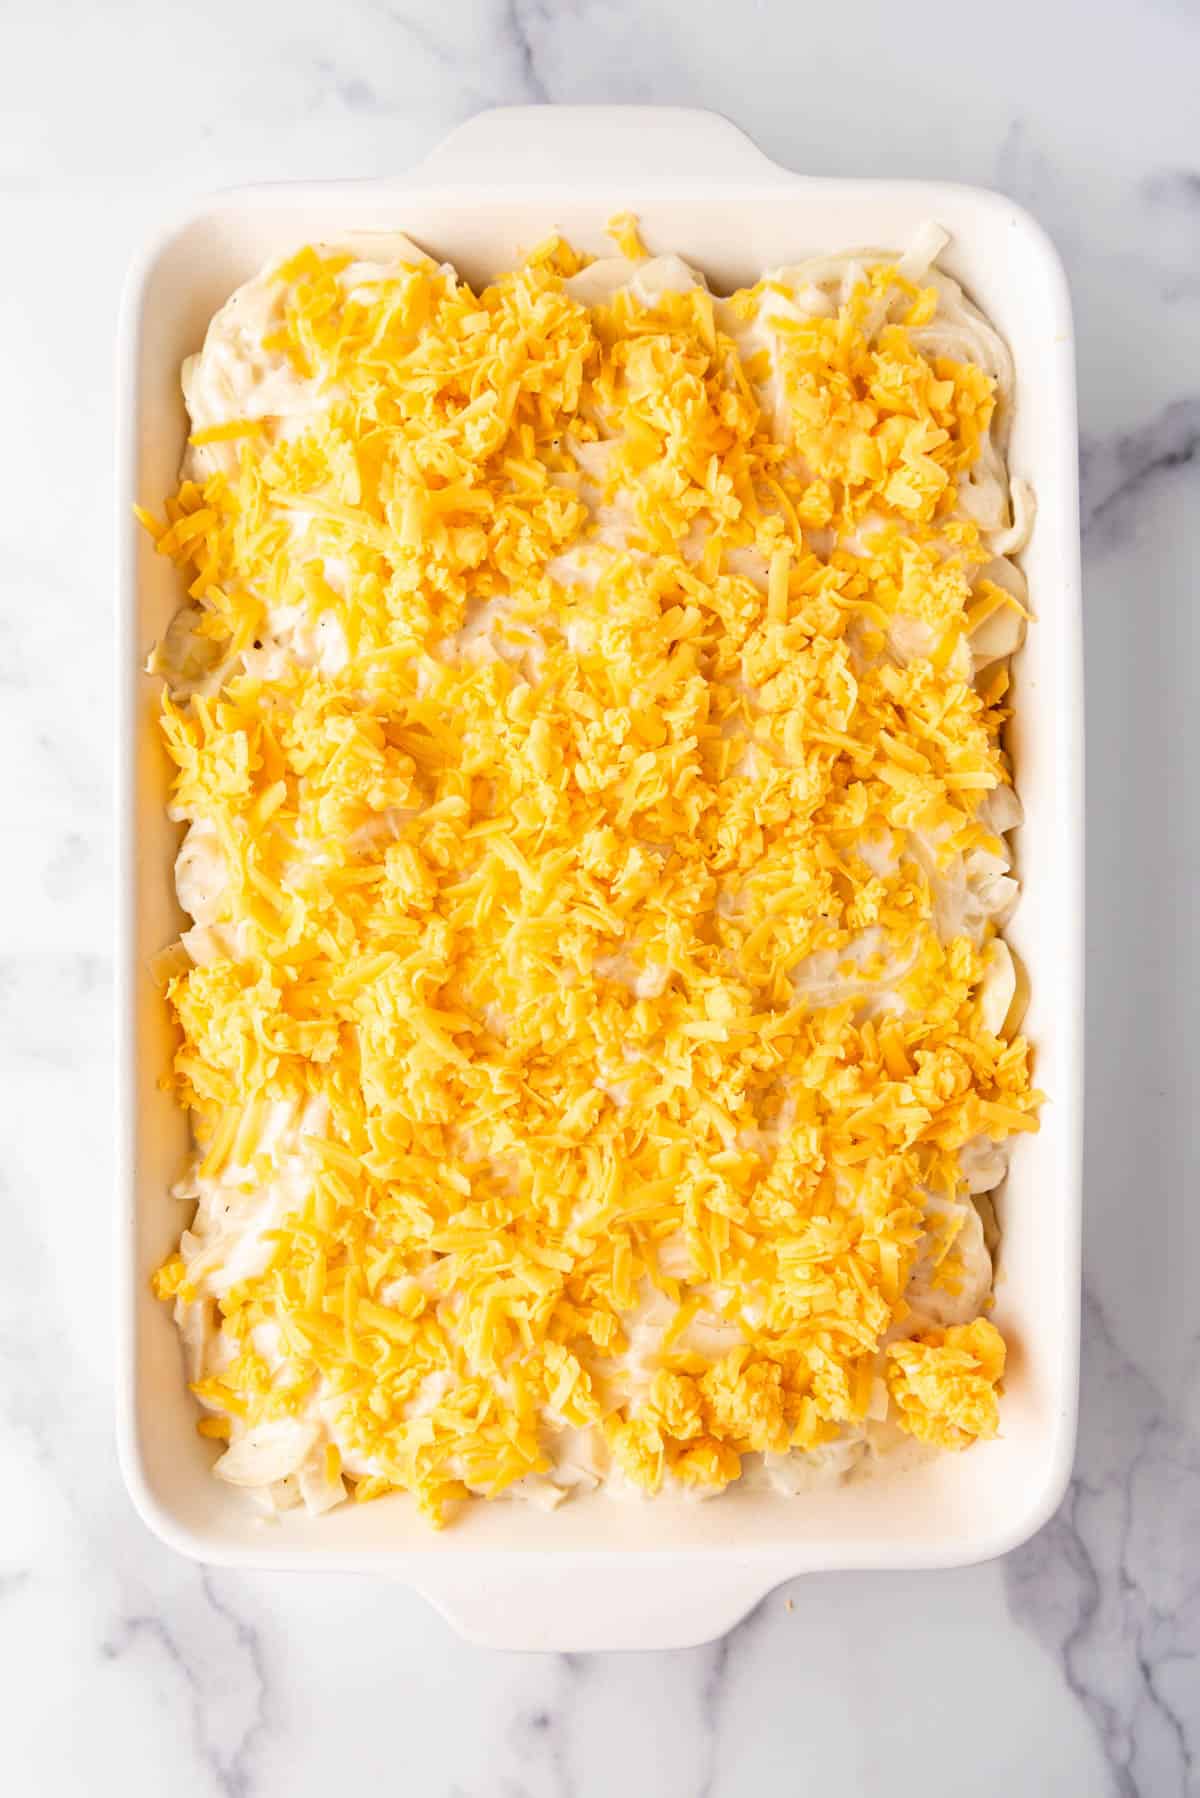 Topping scalloped potatoes with grated cheddar cheese.